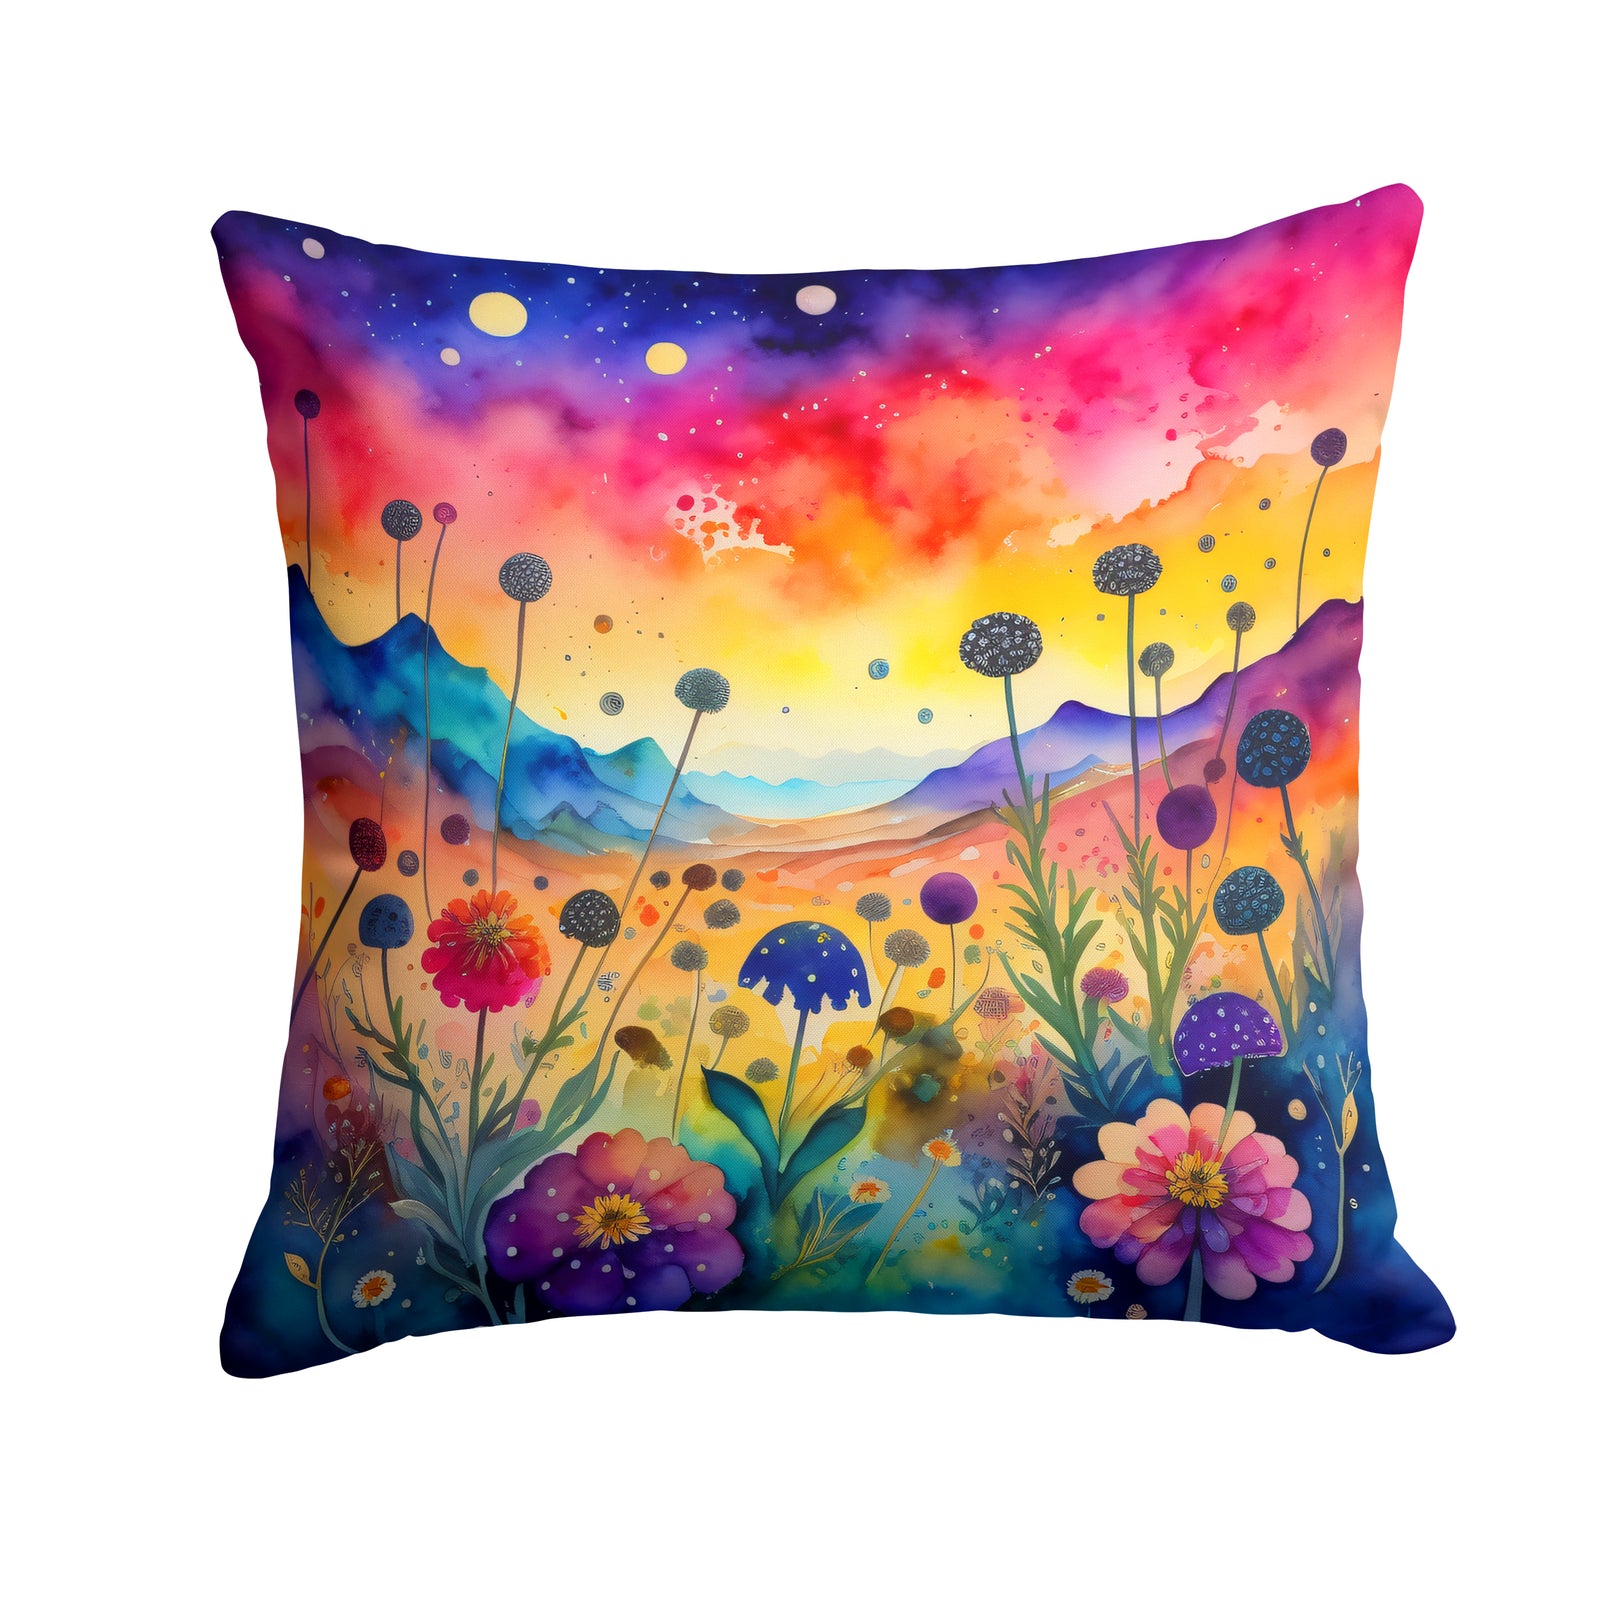 Buy this Colorful Scabiosa Fabric Decorative Pillow